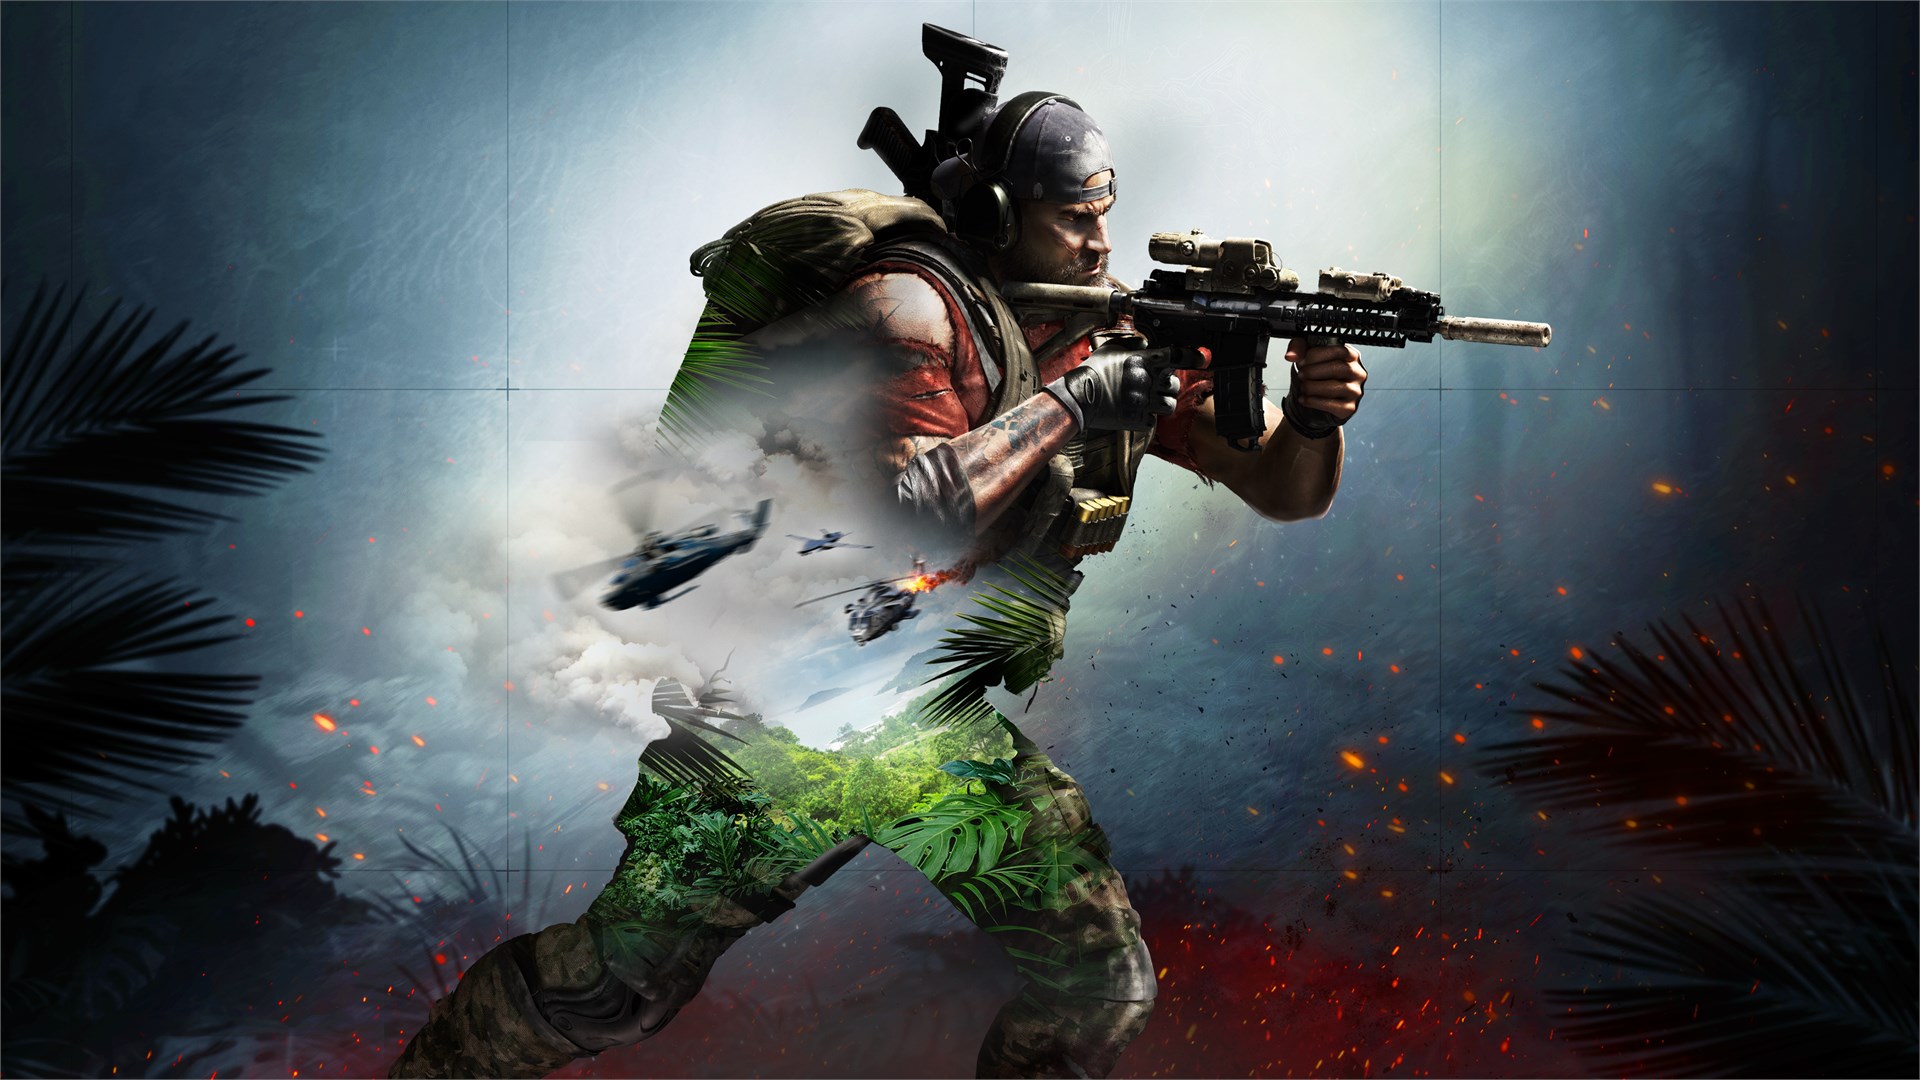 Overlord 3 1 ghost recon breakpoint. Tom Clancy's Ghost Recon breakpoint 2. Ghost Recon breakpoint 2022. Том Клэнси Ghost Recon breakpoint. Гоуст Рекон брейкпоинт.